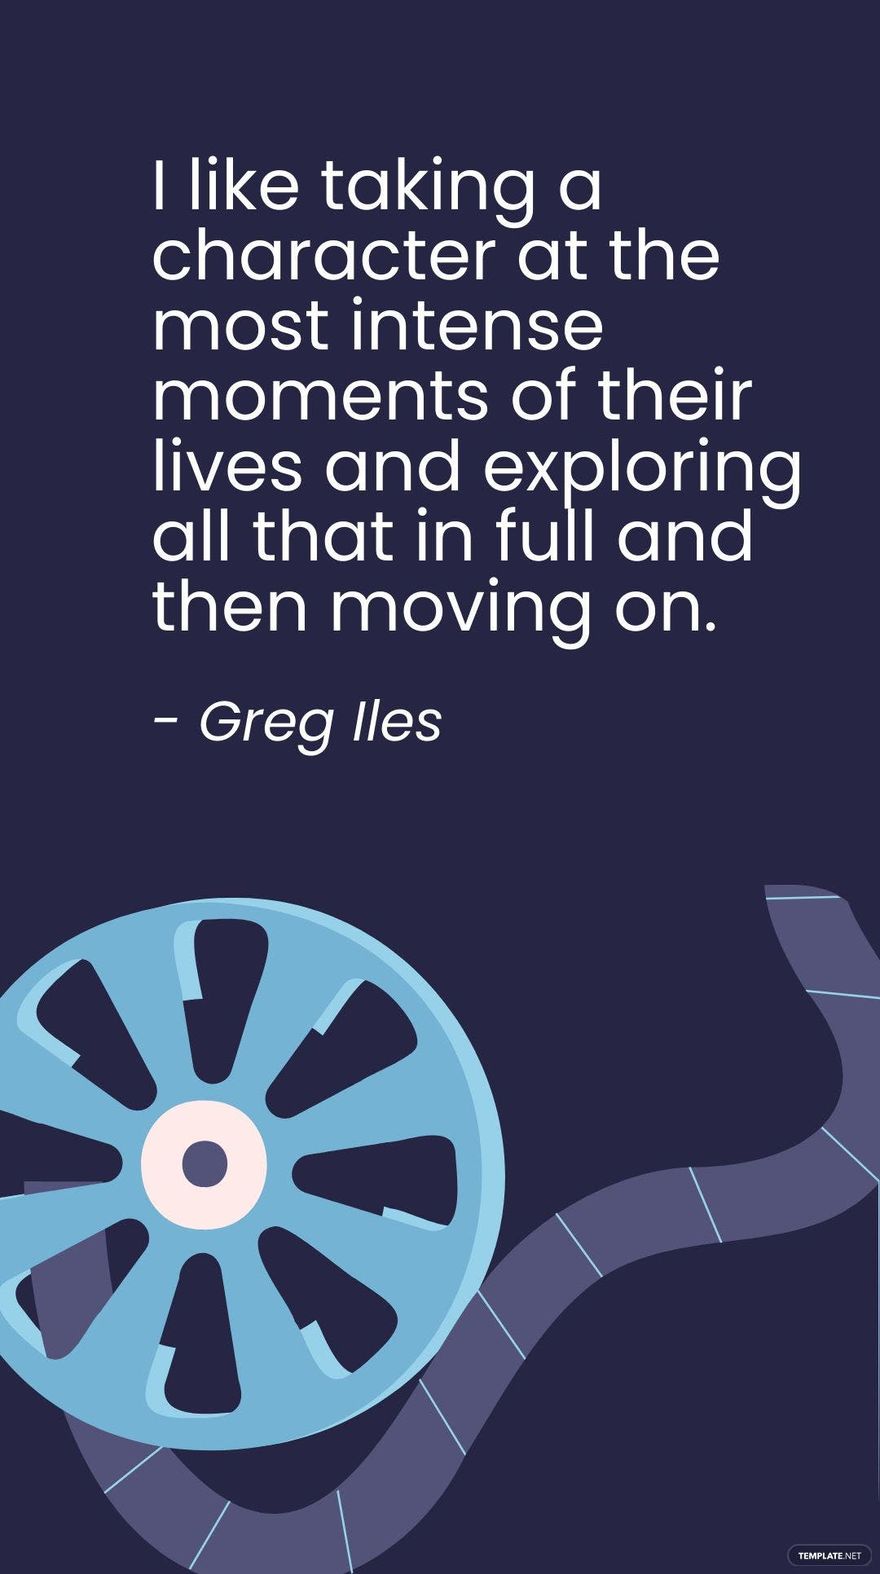 Greg Iles - I like taking a character at the most intense moments of their lives and exploring all that in full and then moving on. in JPG